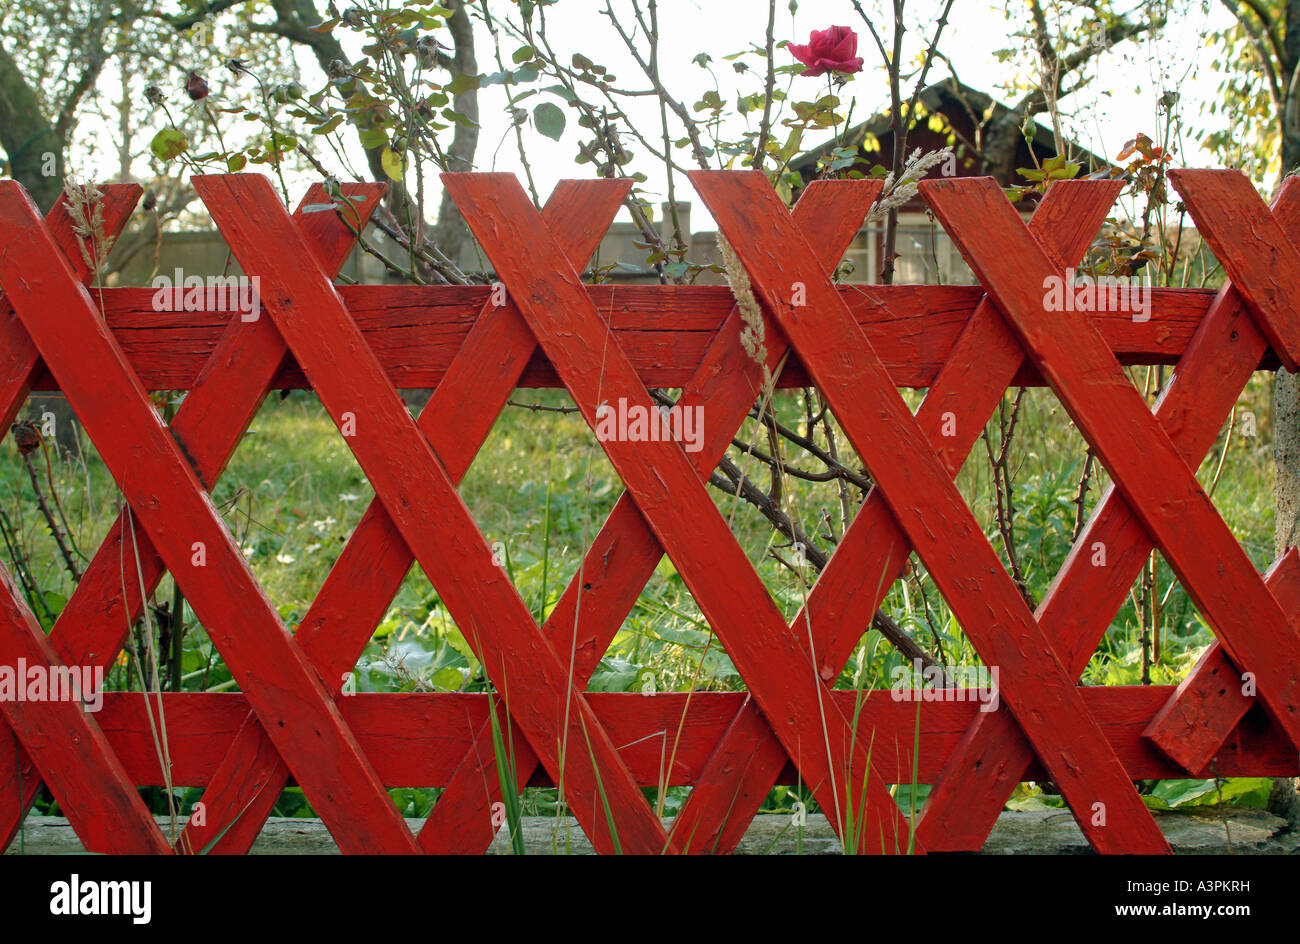 A red garden fence Stock Photo